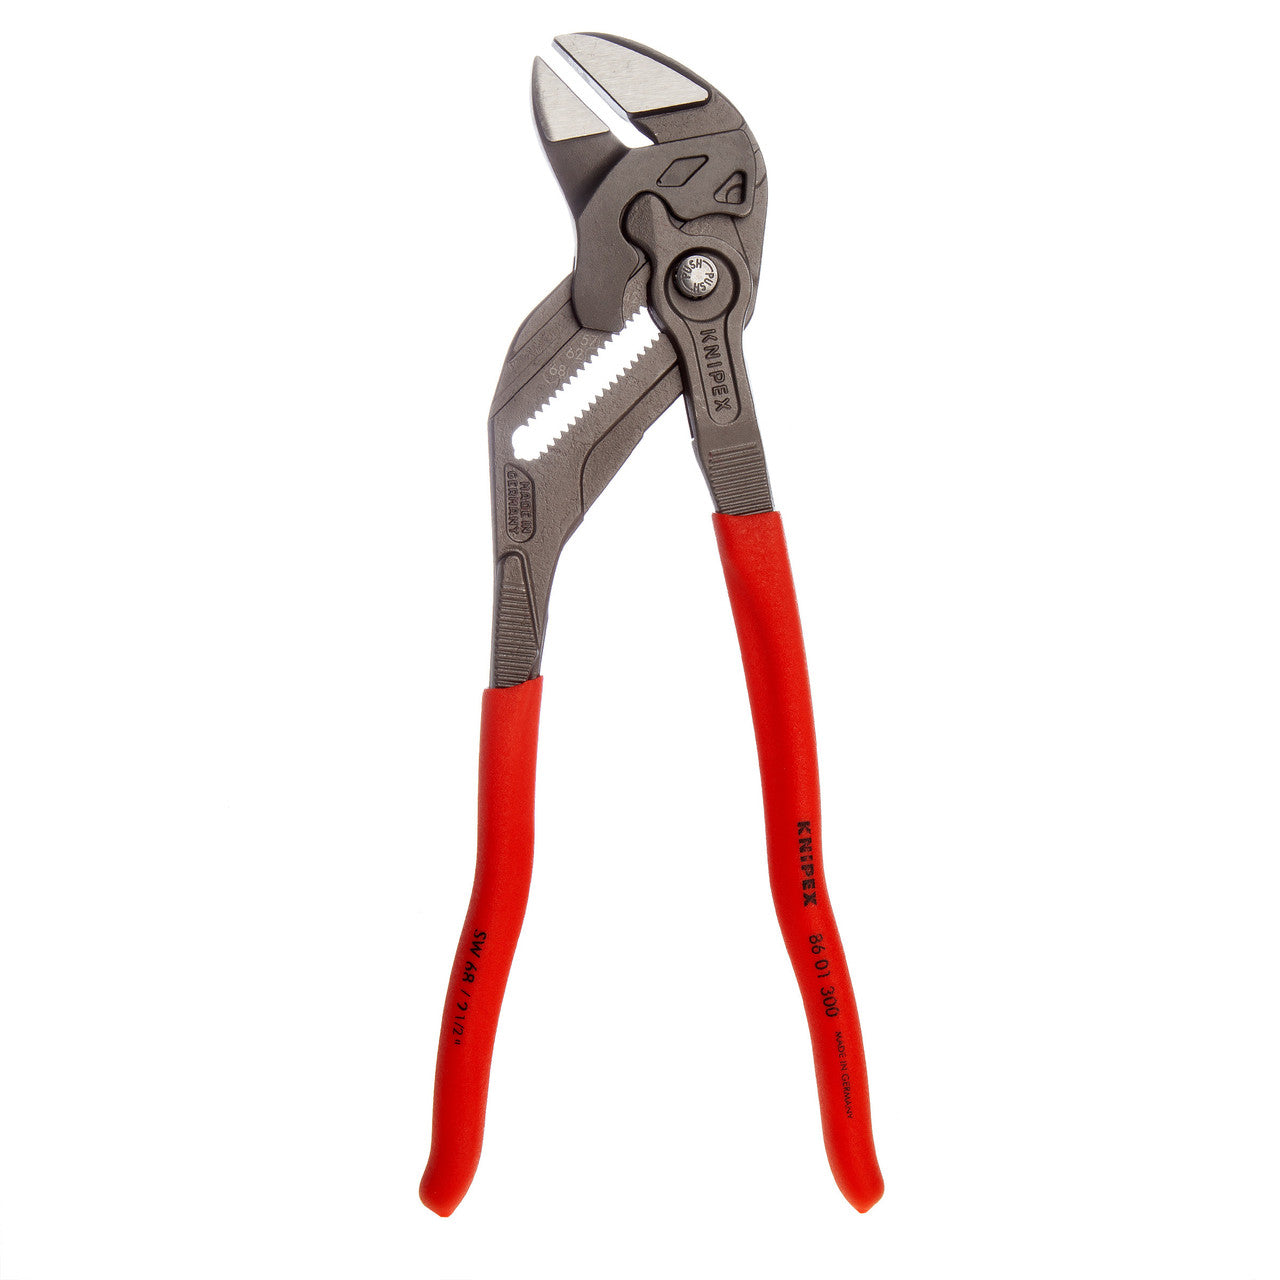 Knipex 8601300 Pliers + Wrench 2 in 1 Tool Grey Atramentized 300mm